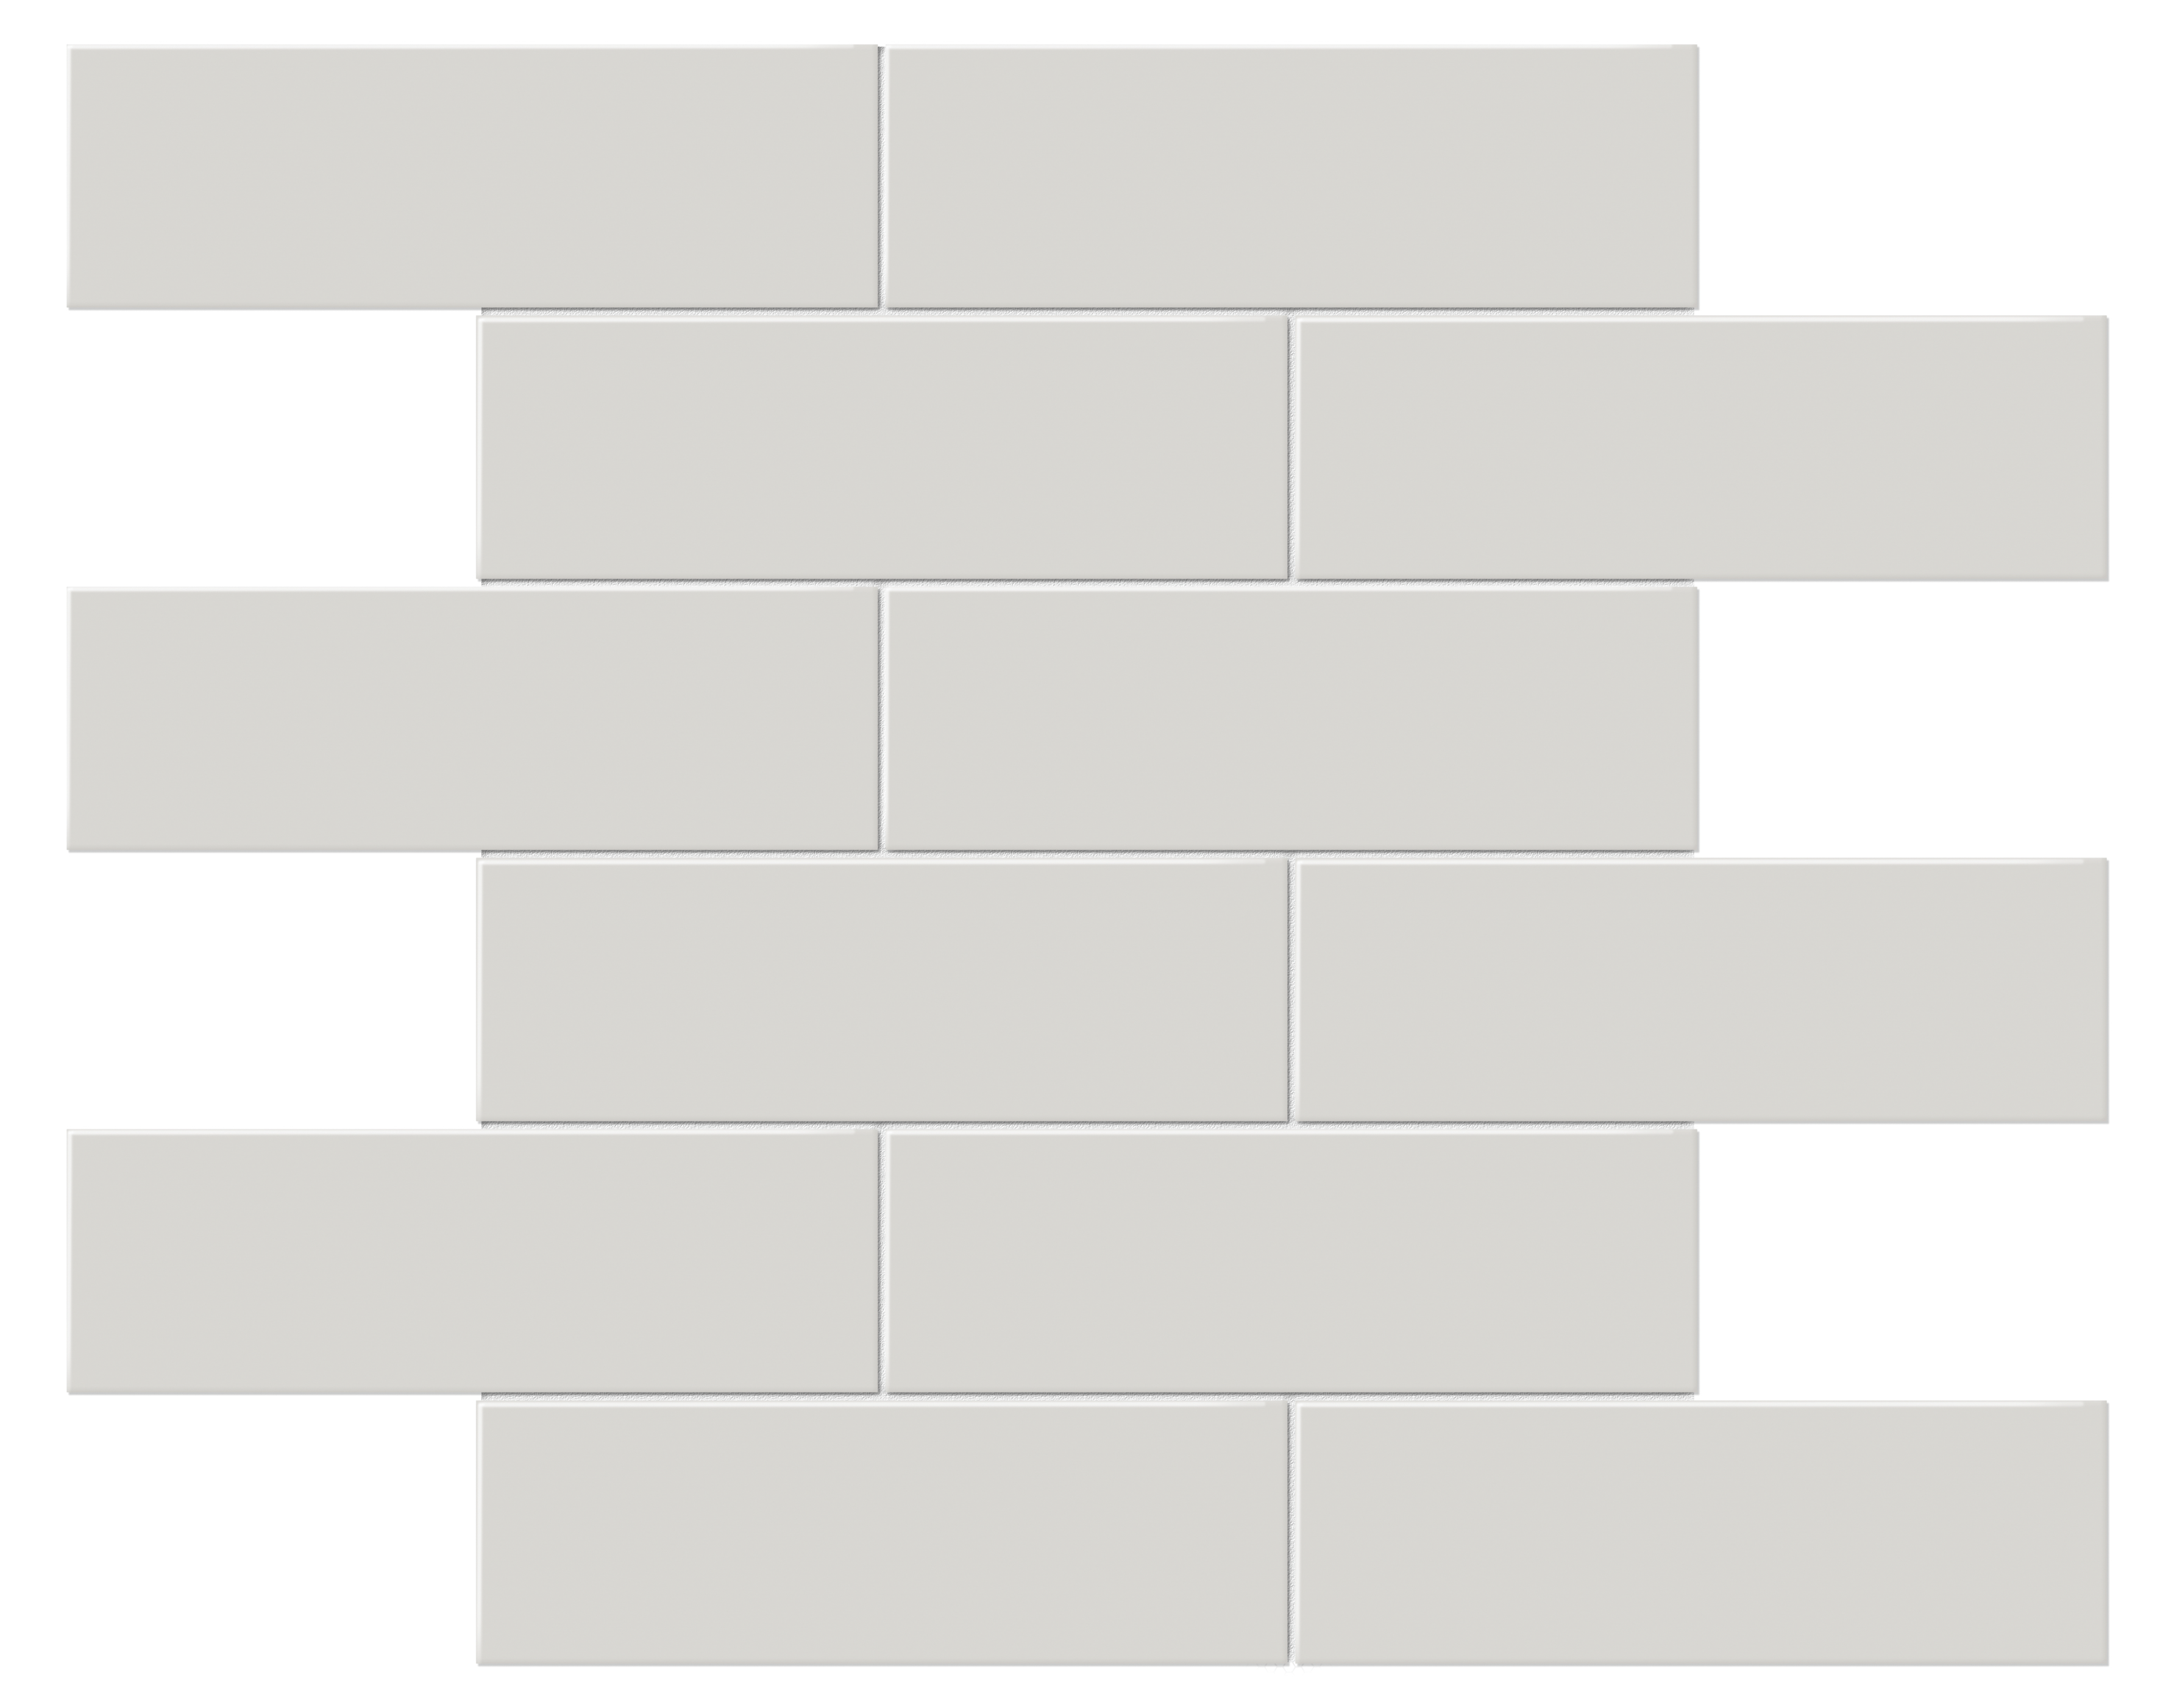 halo grey brick offset 2x6-inch pattern glazed porcelain mosaic from soho anatolia collection distributed by surface group international matte finish pressed edge mesh shape